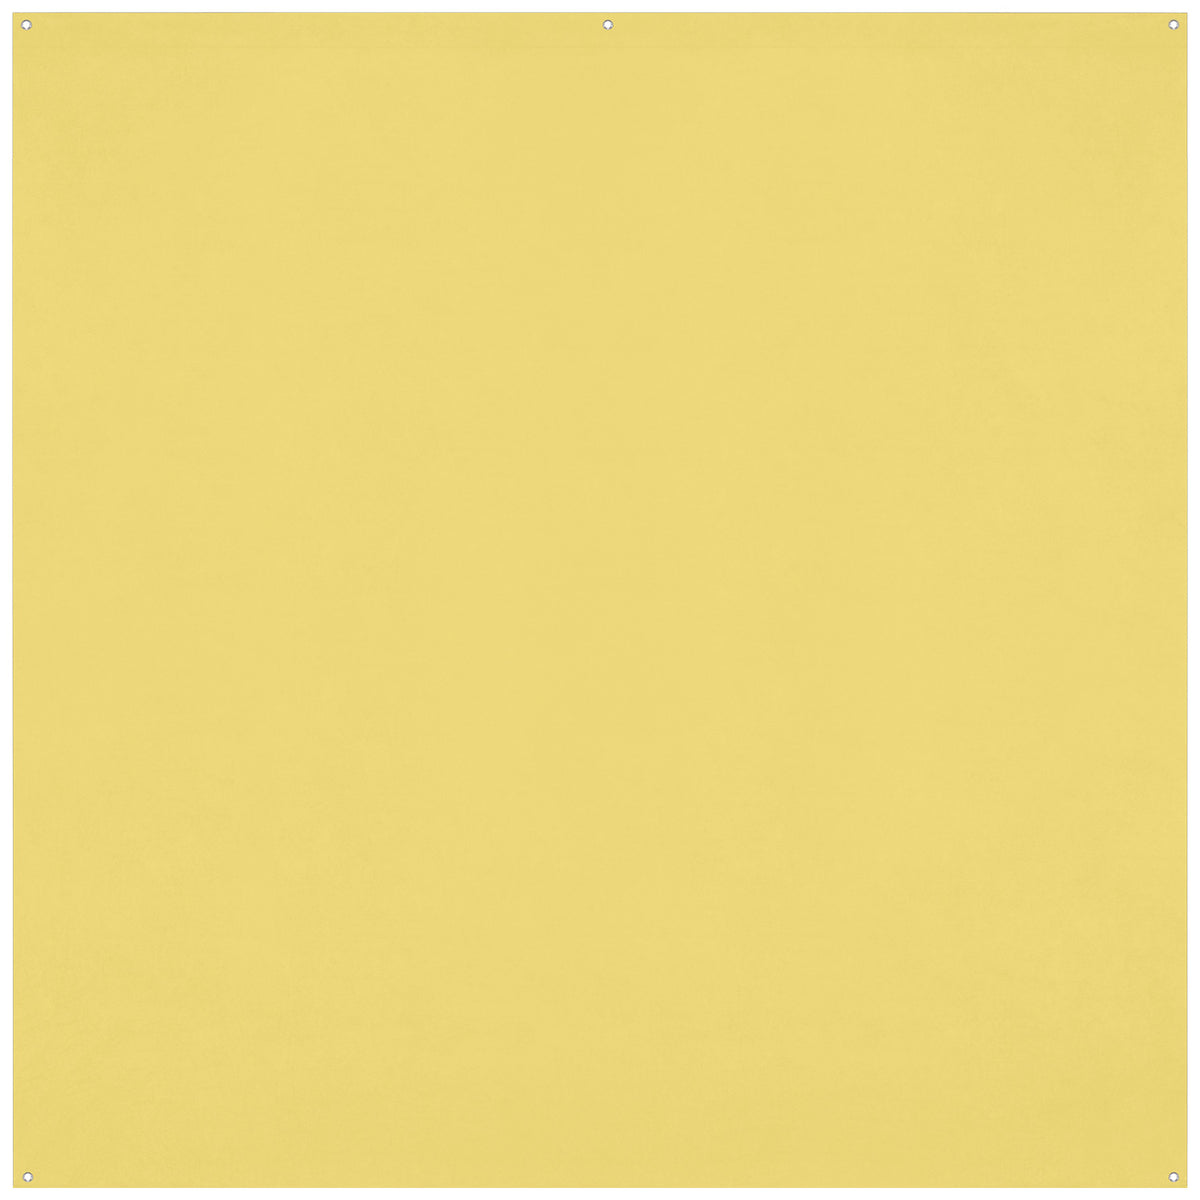 X-Drop Pro Wrinkle-Resistant Backdrop - Canary Yellow (8' x 8')